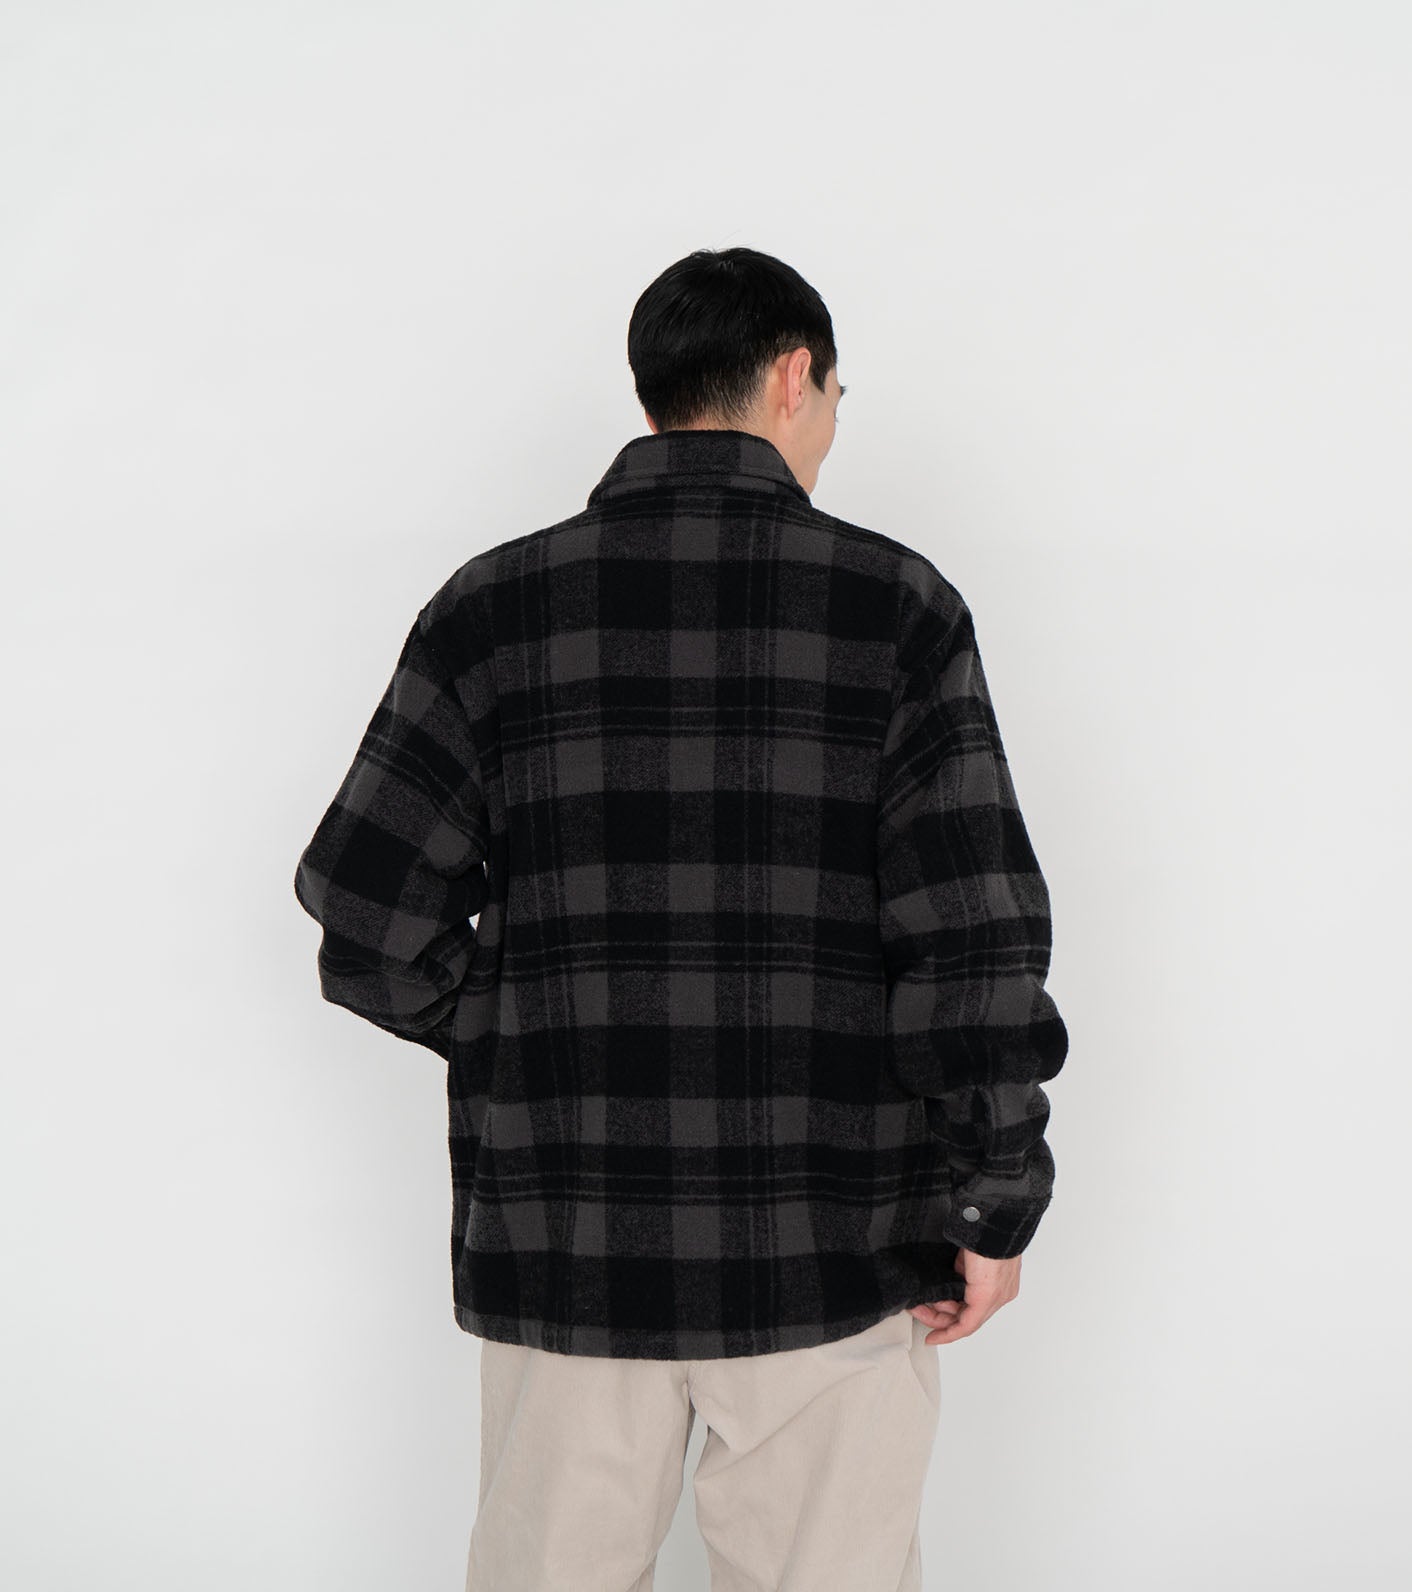 THE NORTH FACE PURPLE LABEL Wool Field CPO Jacket